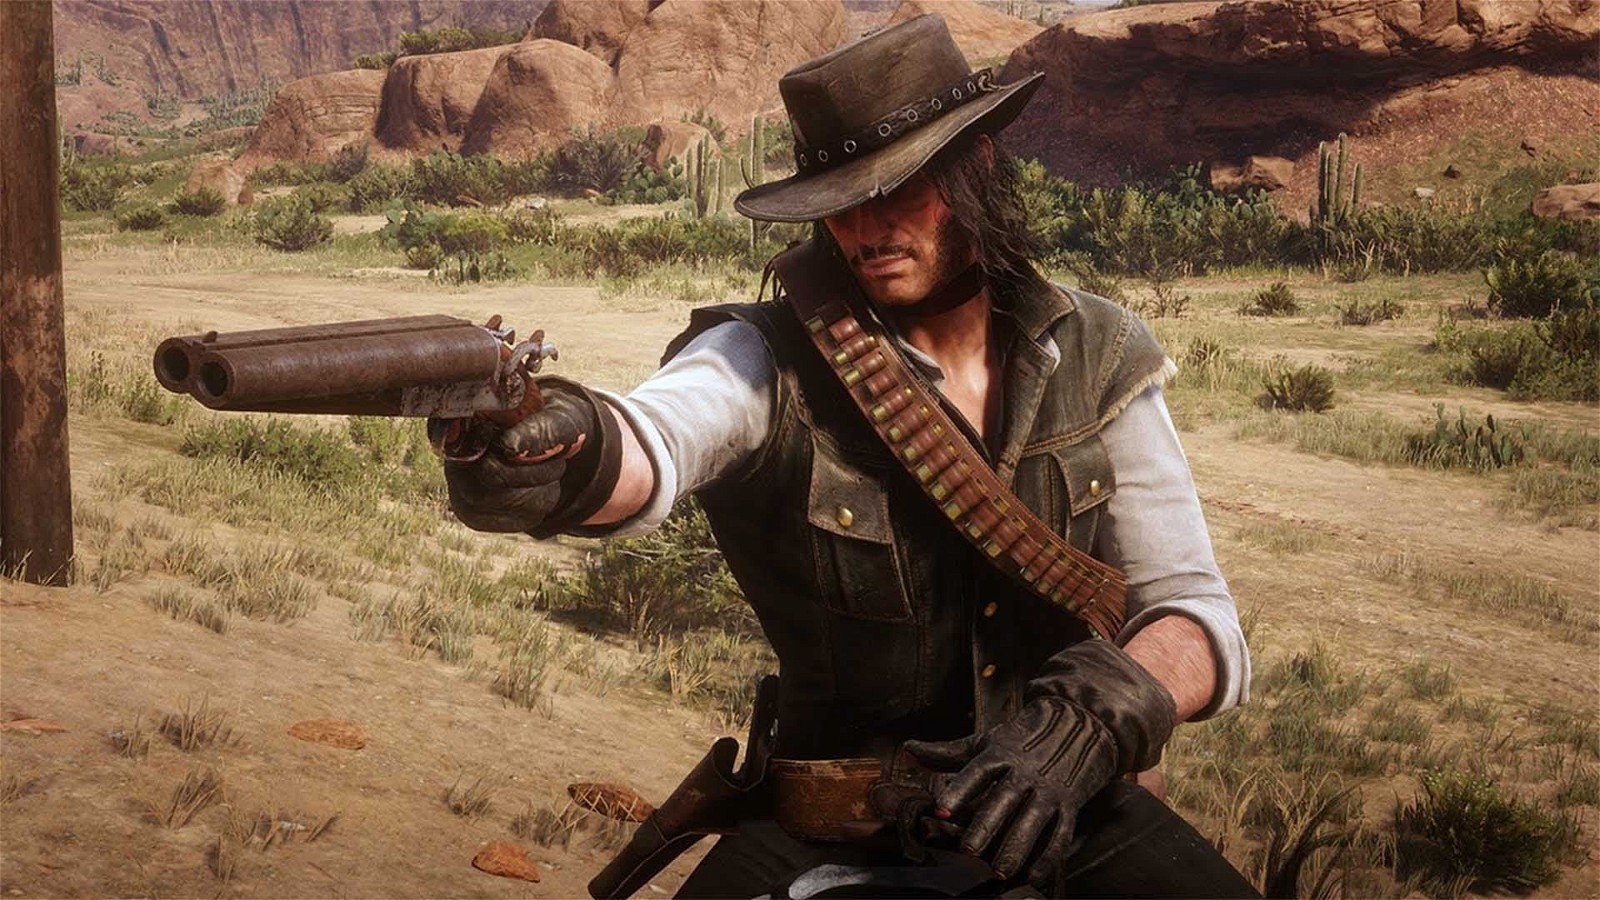 Red Dead Redemption 2 Becomes Rockstar’s Second Highest-Selling Game But It’s Still Nowhere Close to GTA 5 Sales
Latest